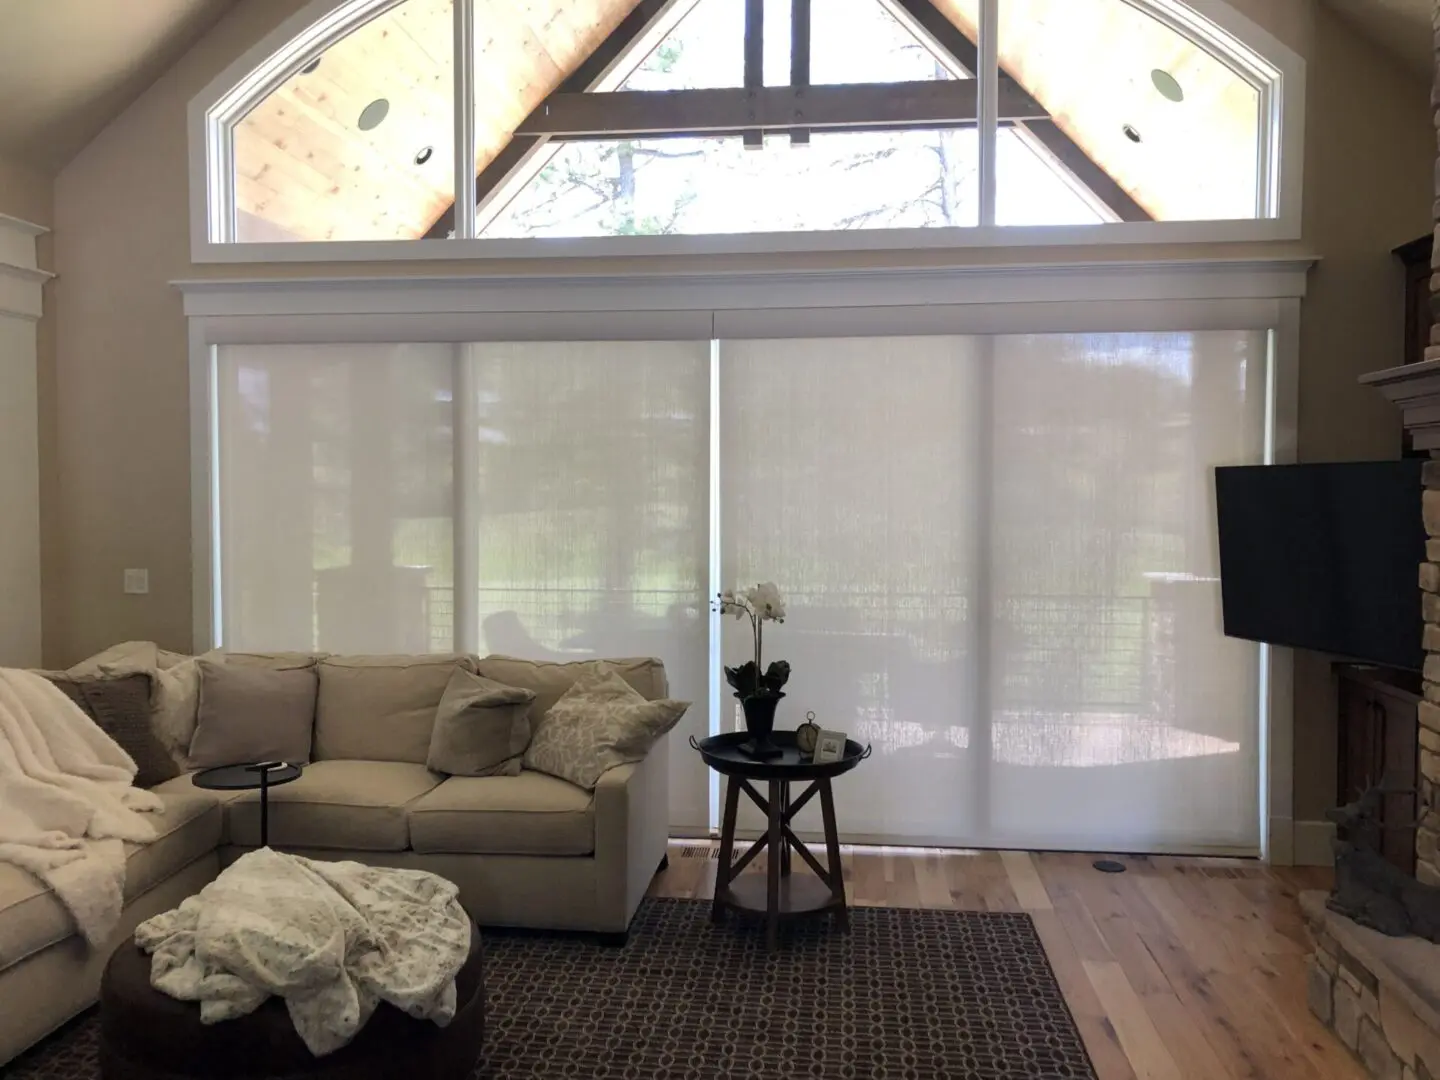 Image of shades in living area